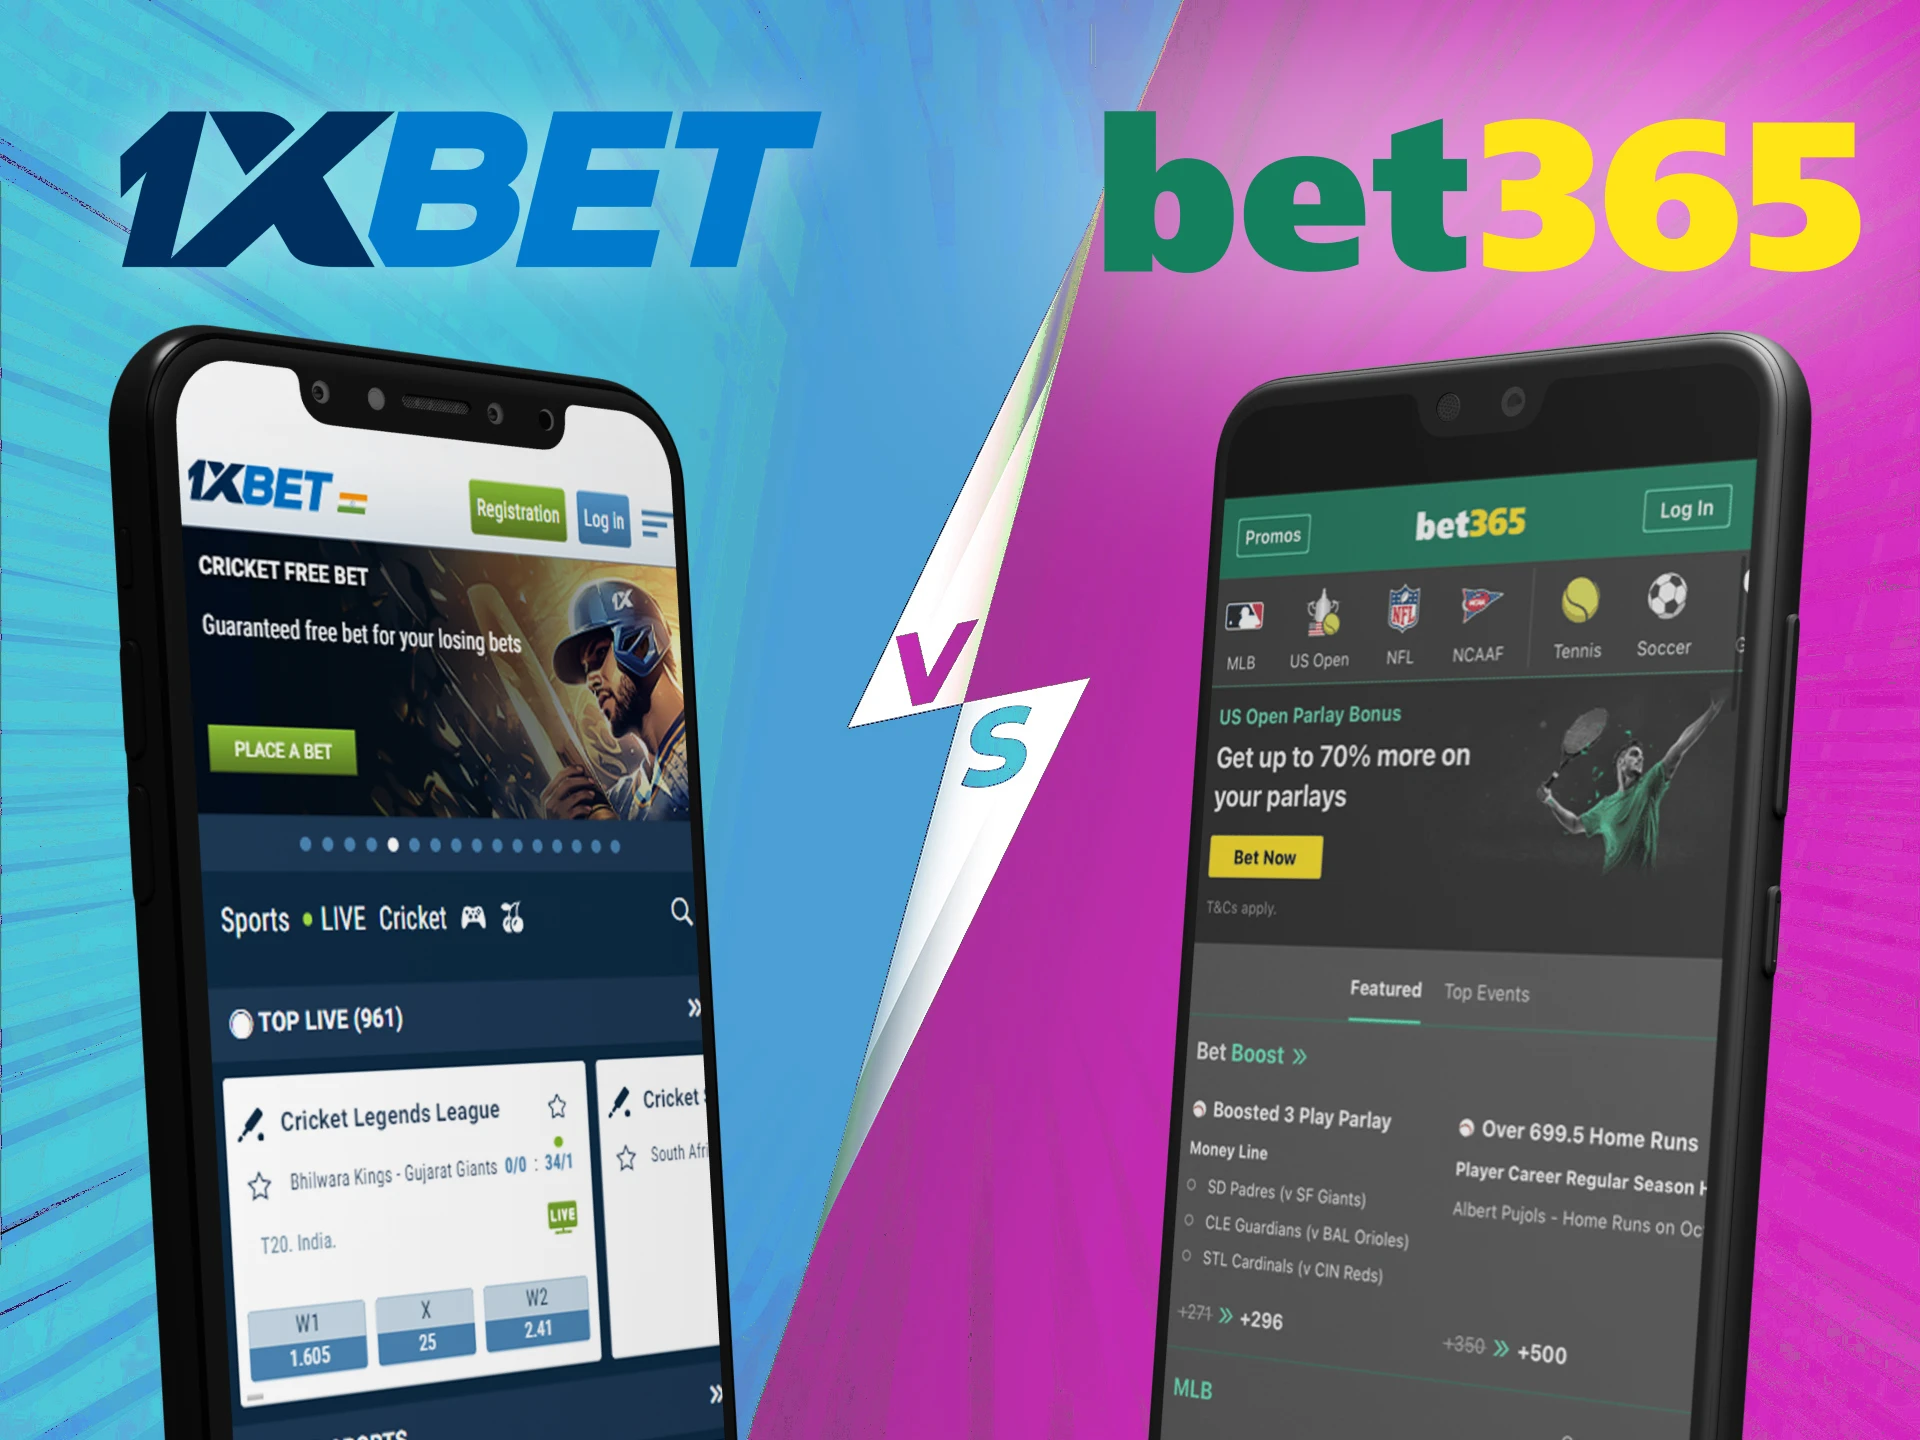 Try the 1xbet and bet365 apps to see which app is right for you.